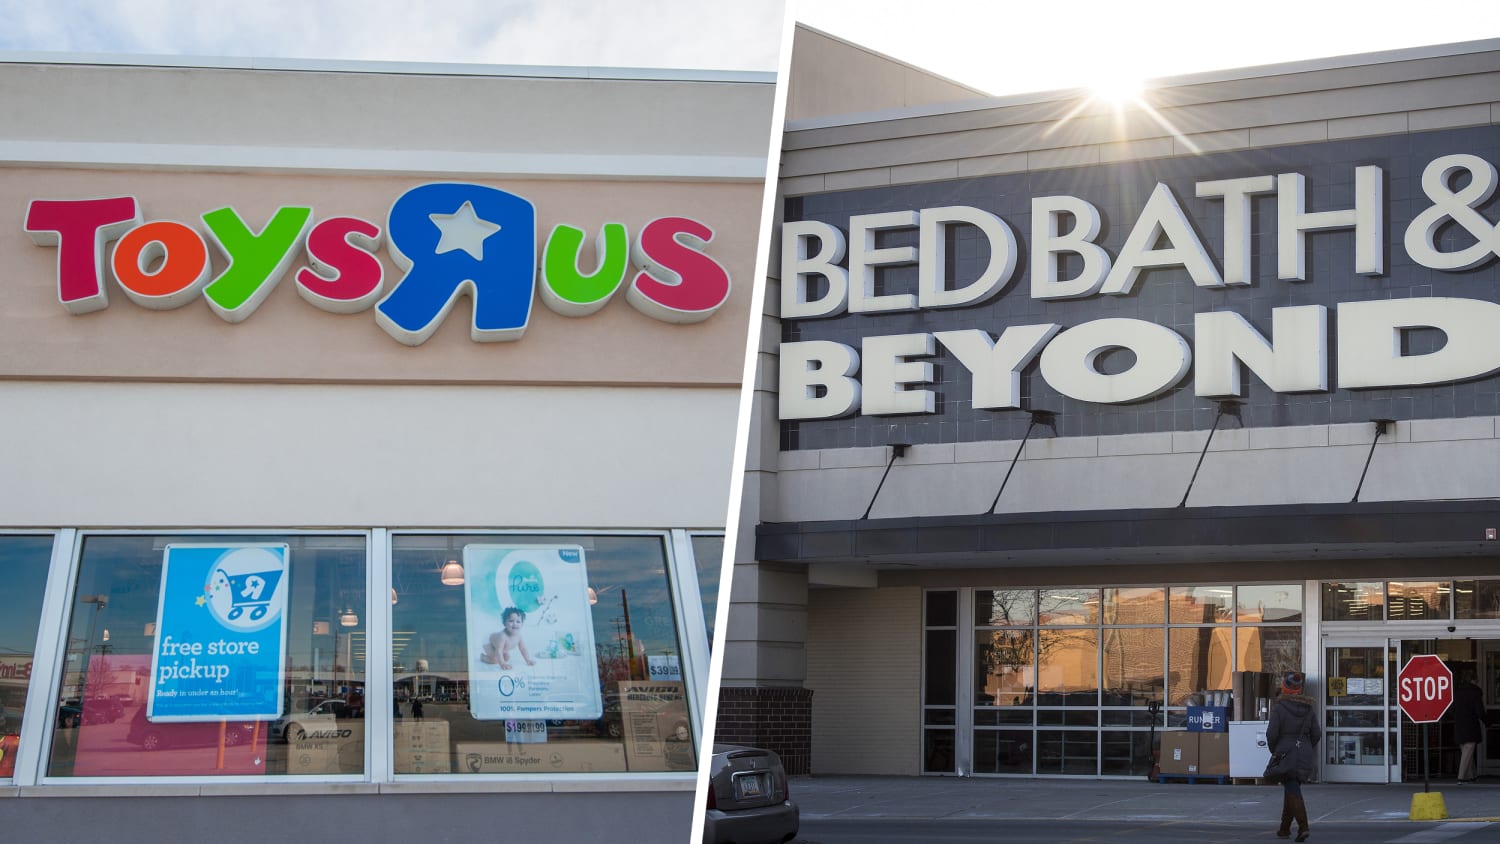 Bed Bath And Beyond Coupon At Babies R Us Online - Bed Bath Beyond Offers To Buy Old Toys R Us Gift Cards - Babies r us takes bed bath and beyond coupons, sportsman's guide shipping coupon code, best travel deals blogs, razer 90 percent off coupon code.